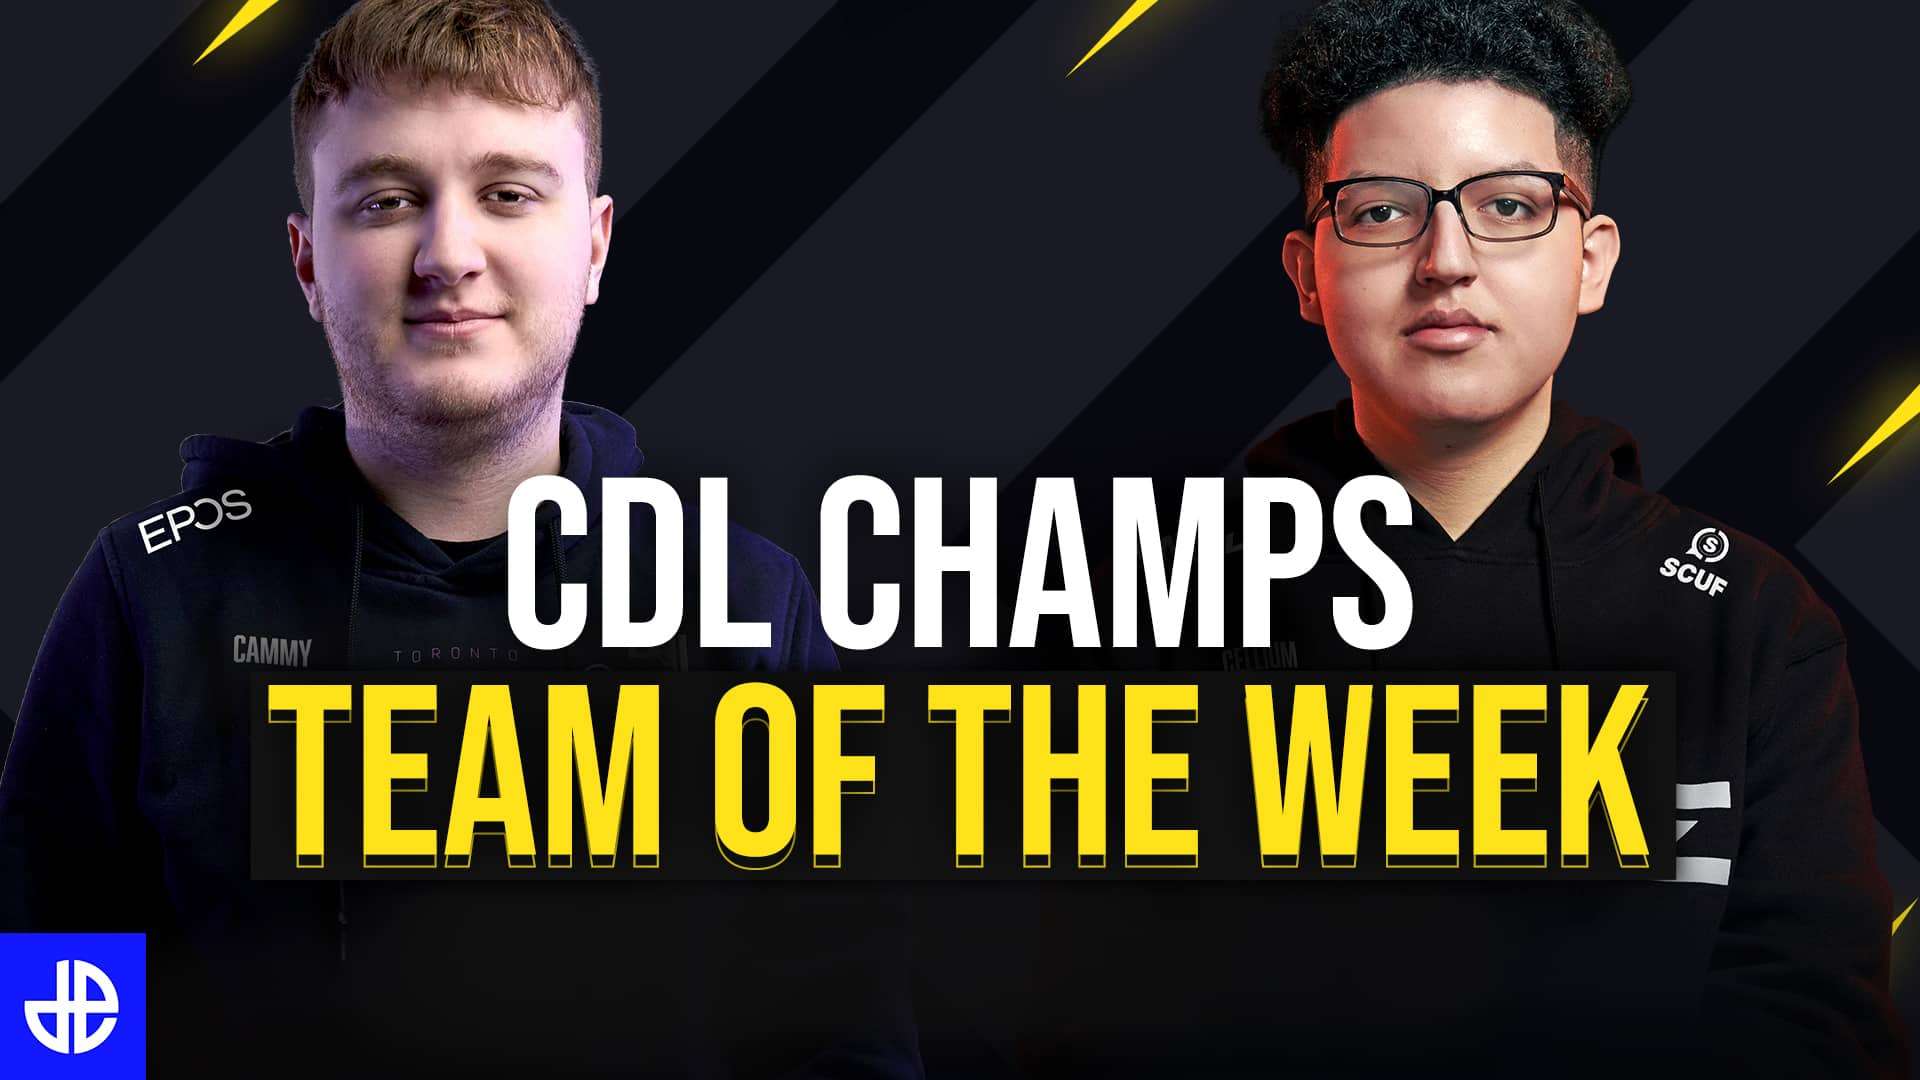 cdl champs team of the week mvp